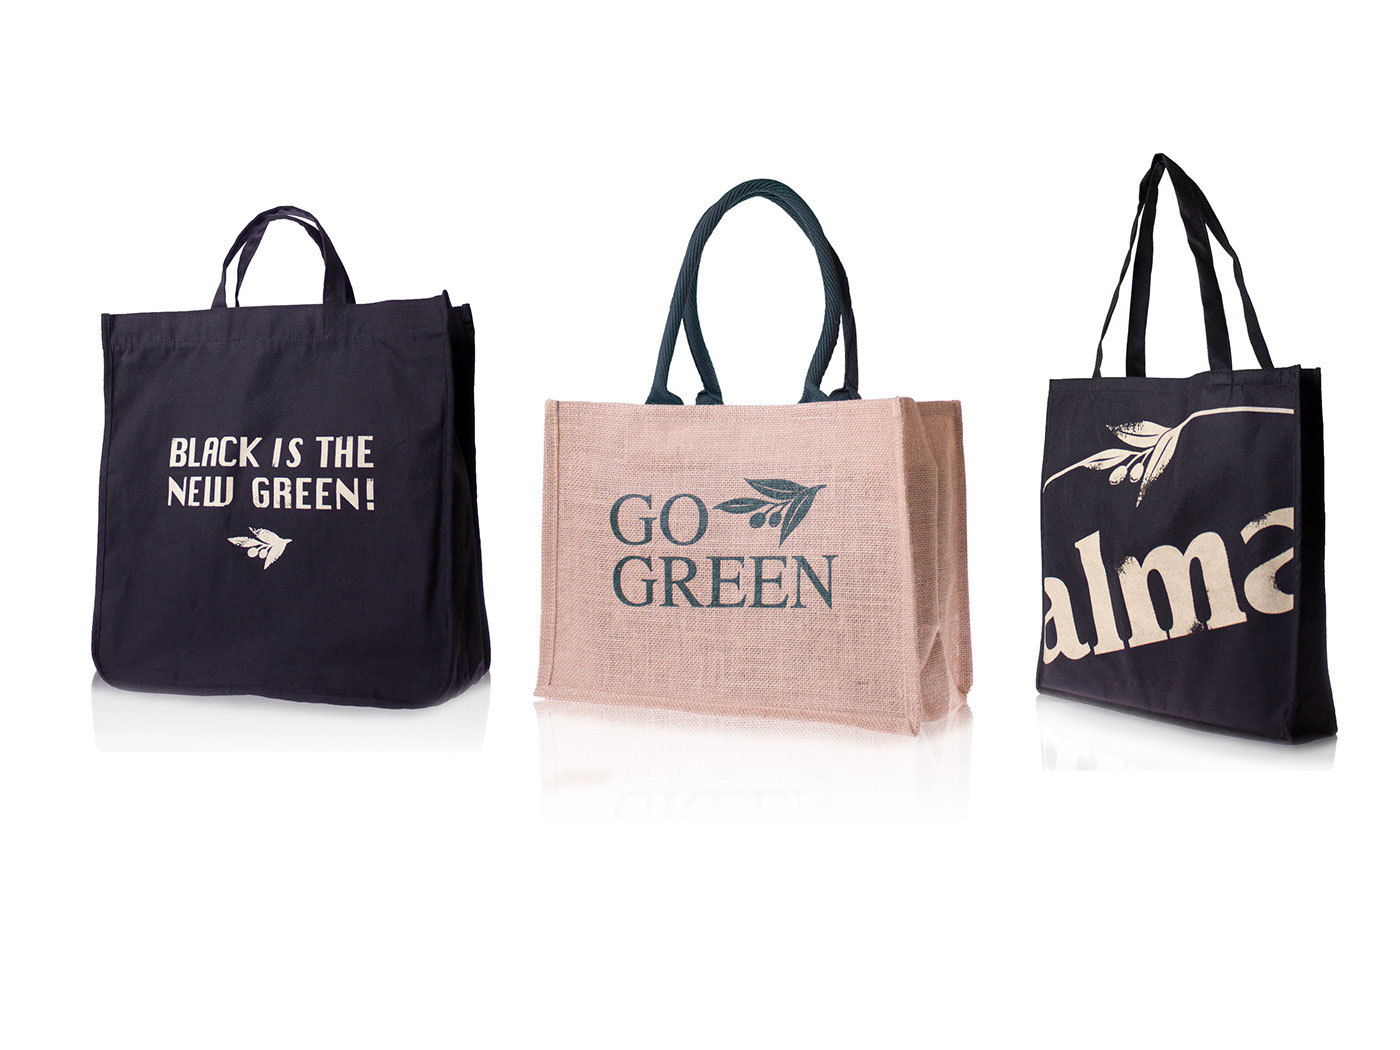 Graphic design on bags on Behance